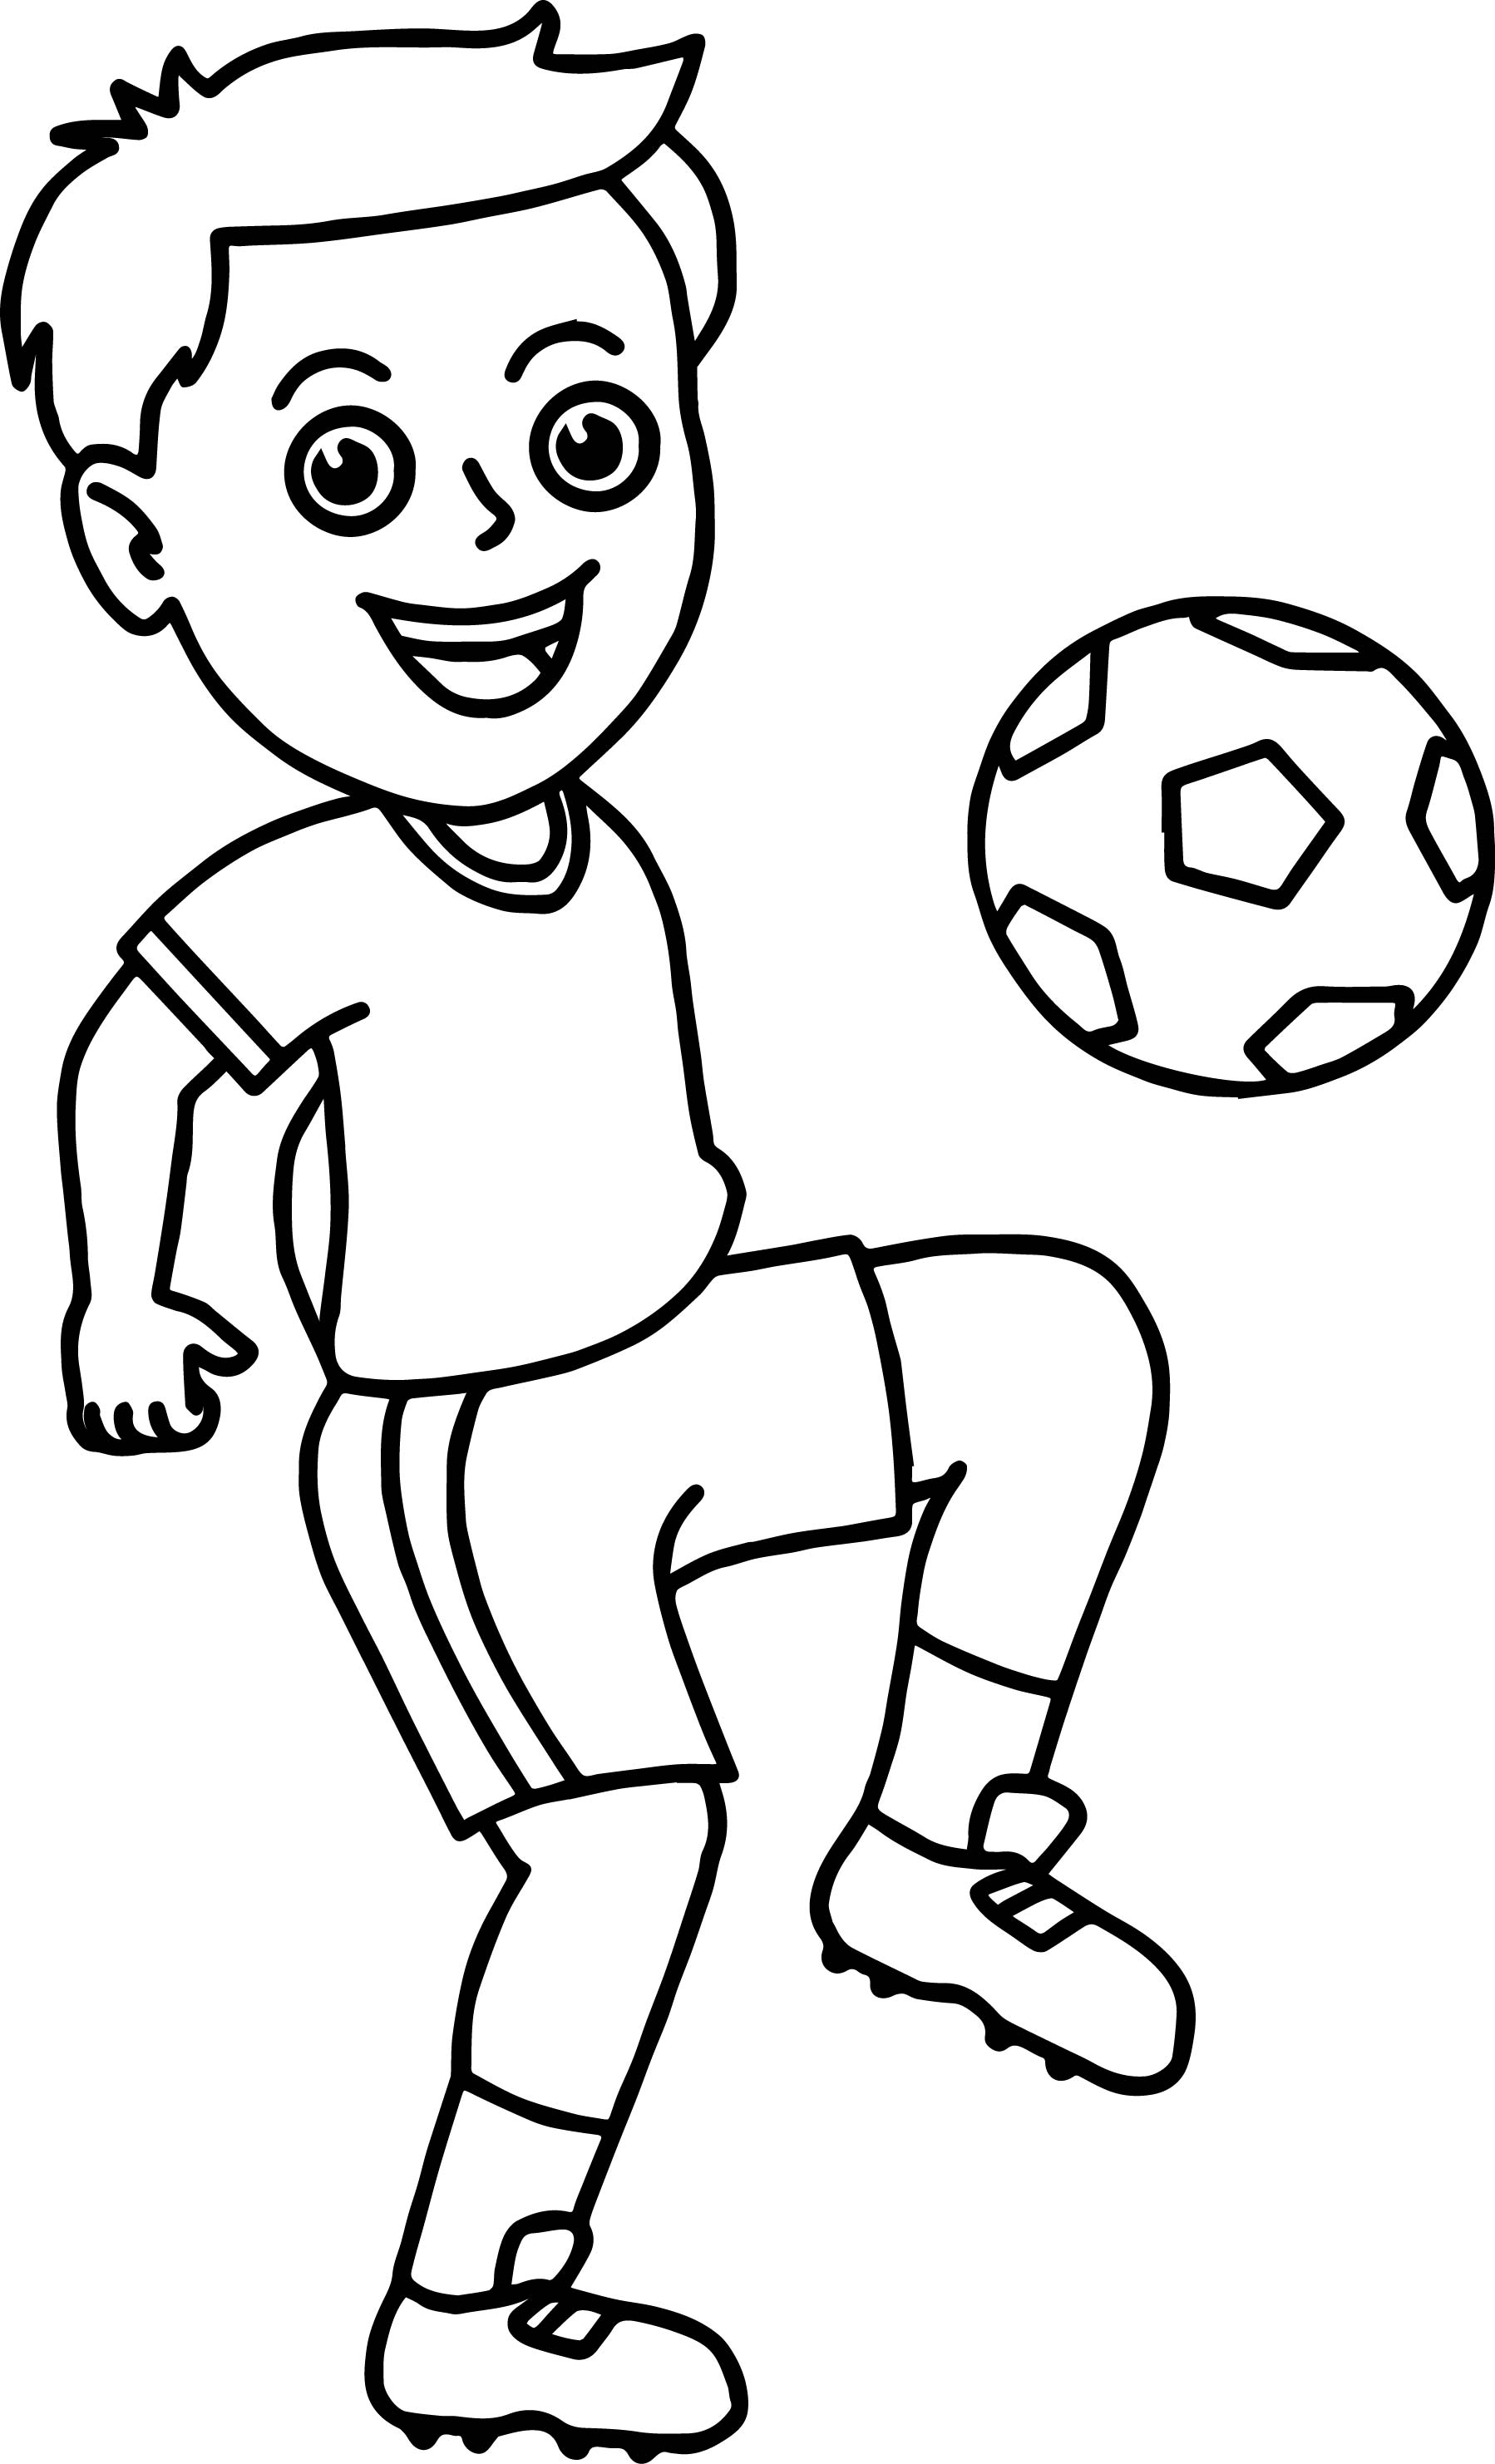 Soccer Player Boy Coloring Page | Wecoloringpage.com